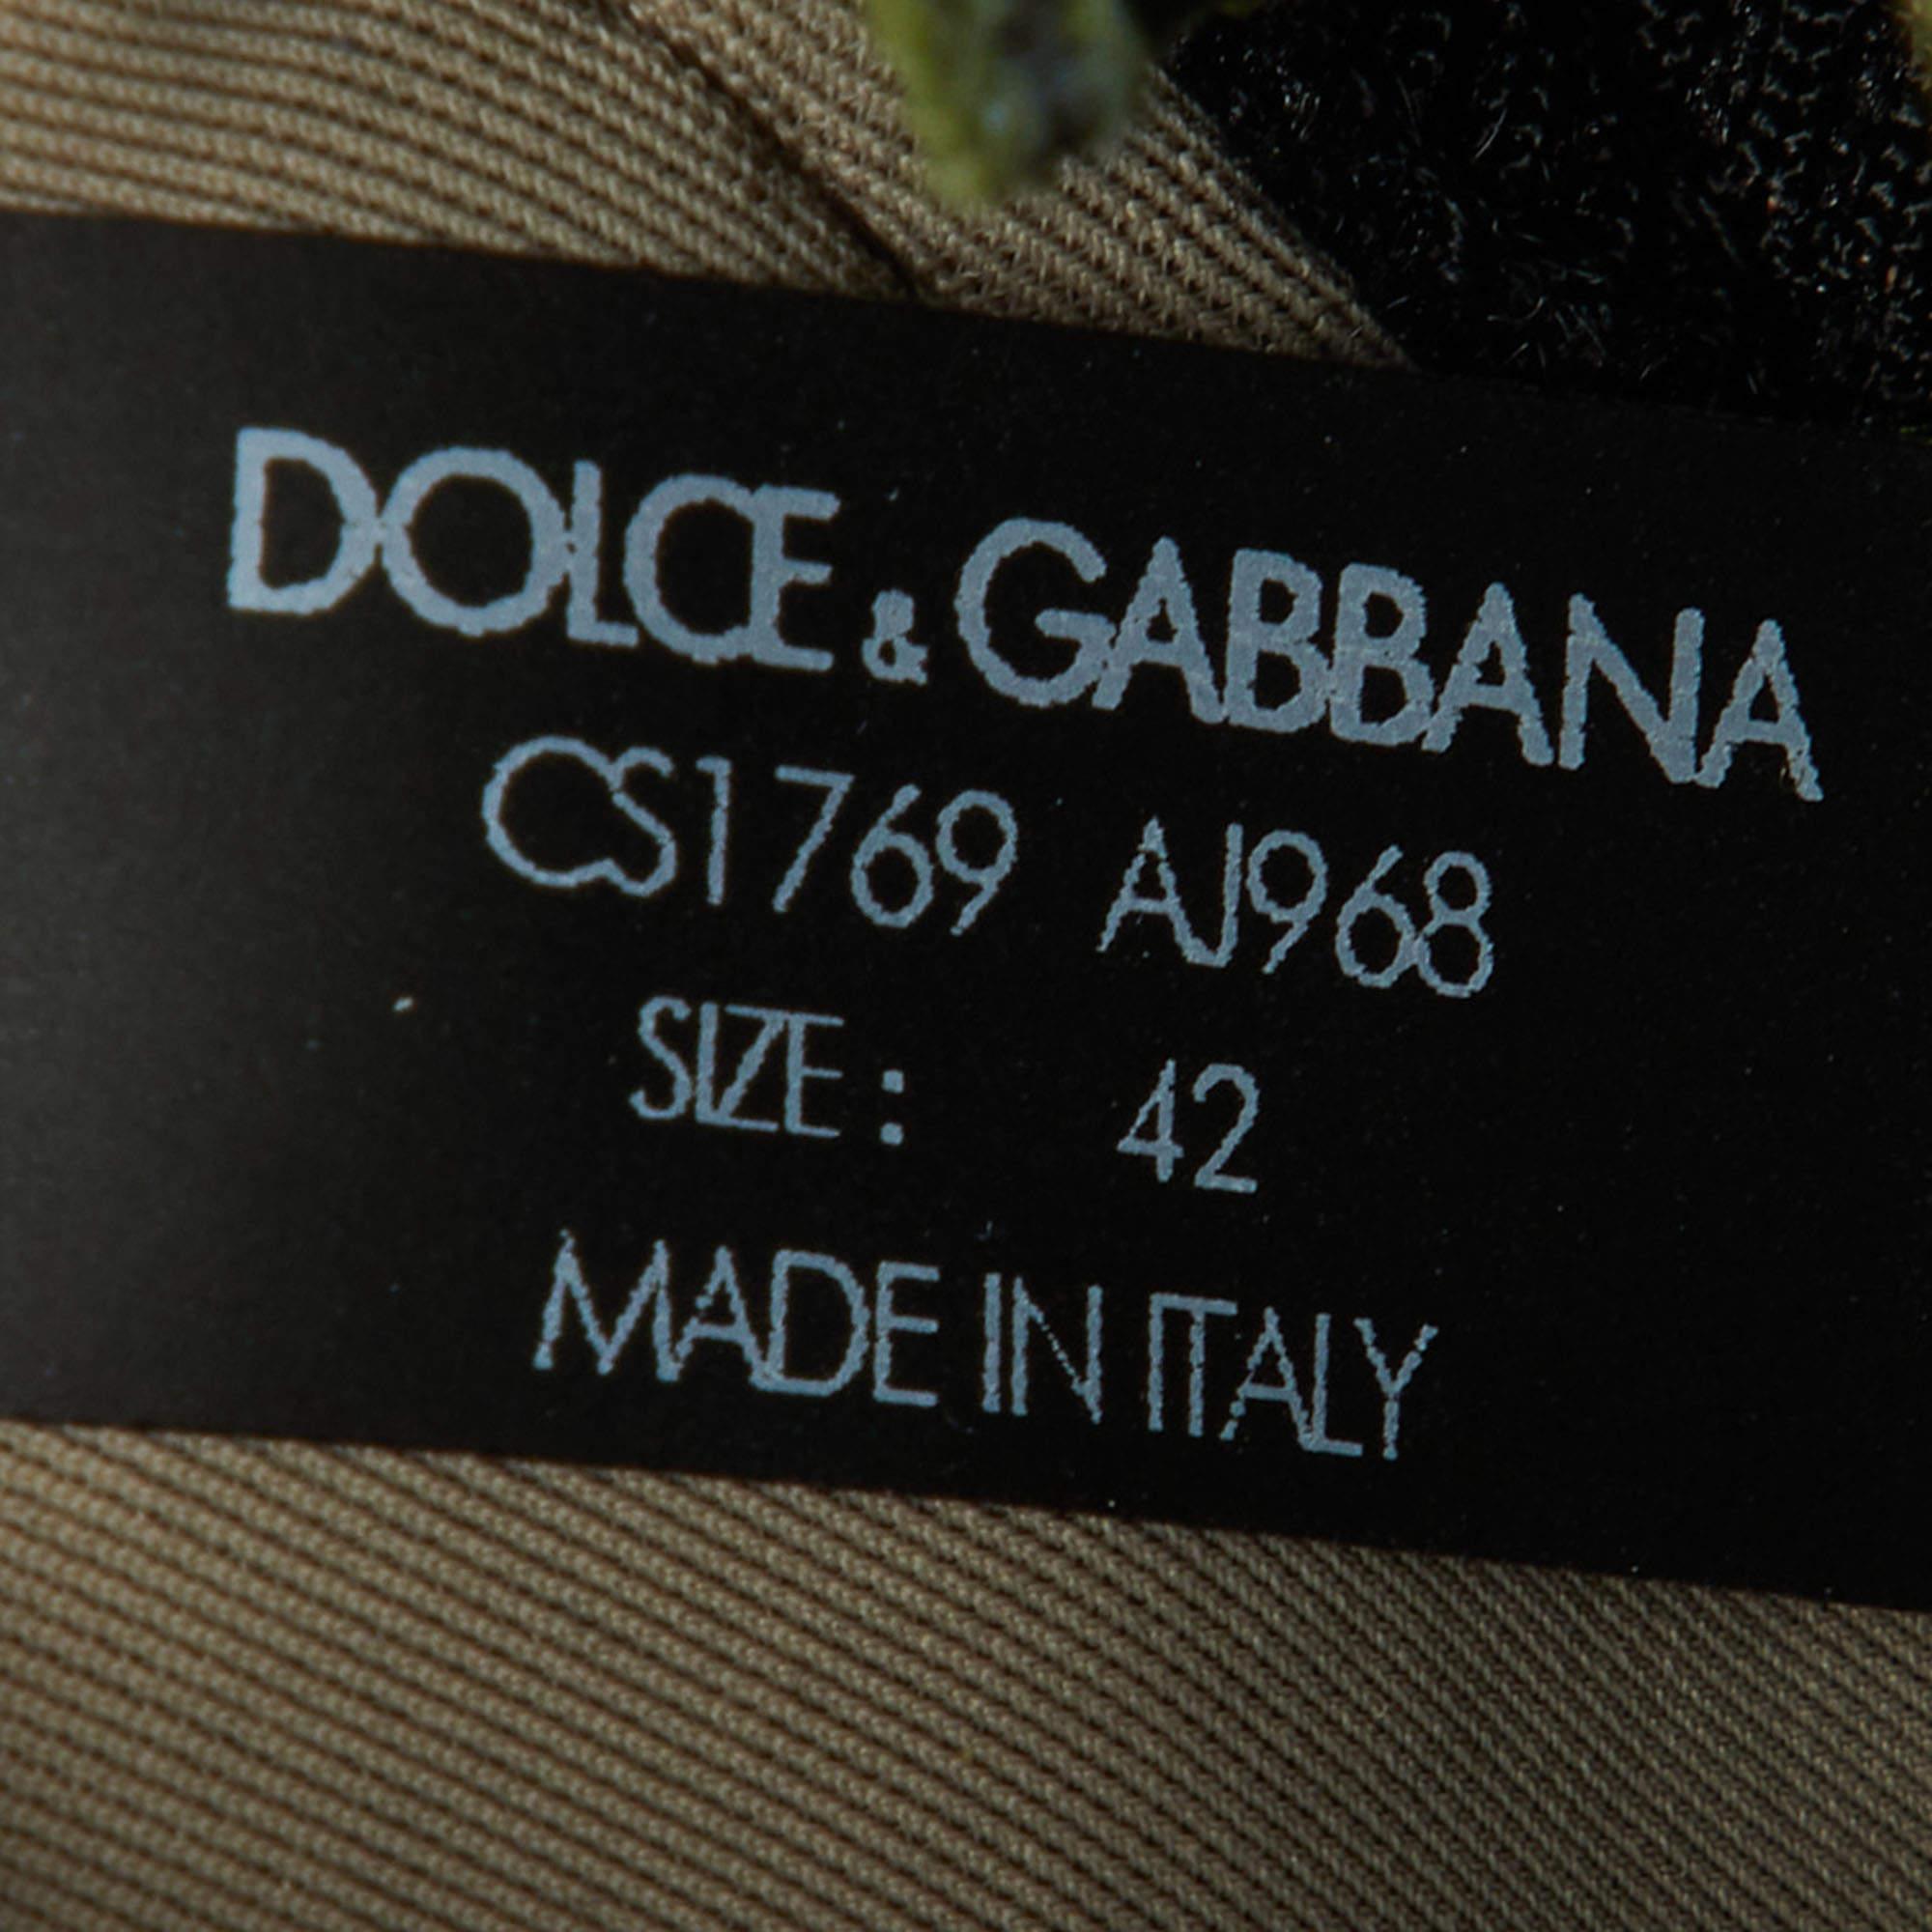 Dolce & Gabbana Tricolor Fabric and Mesh Ns1 Low Top Sneakers Size 42 4